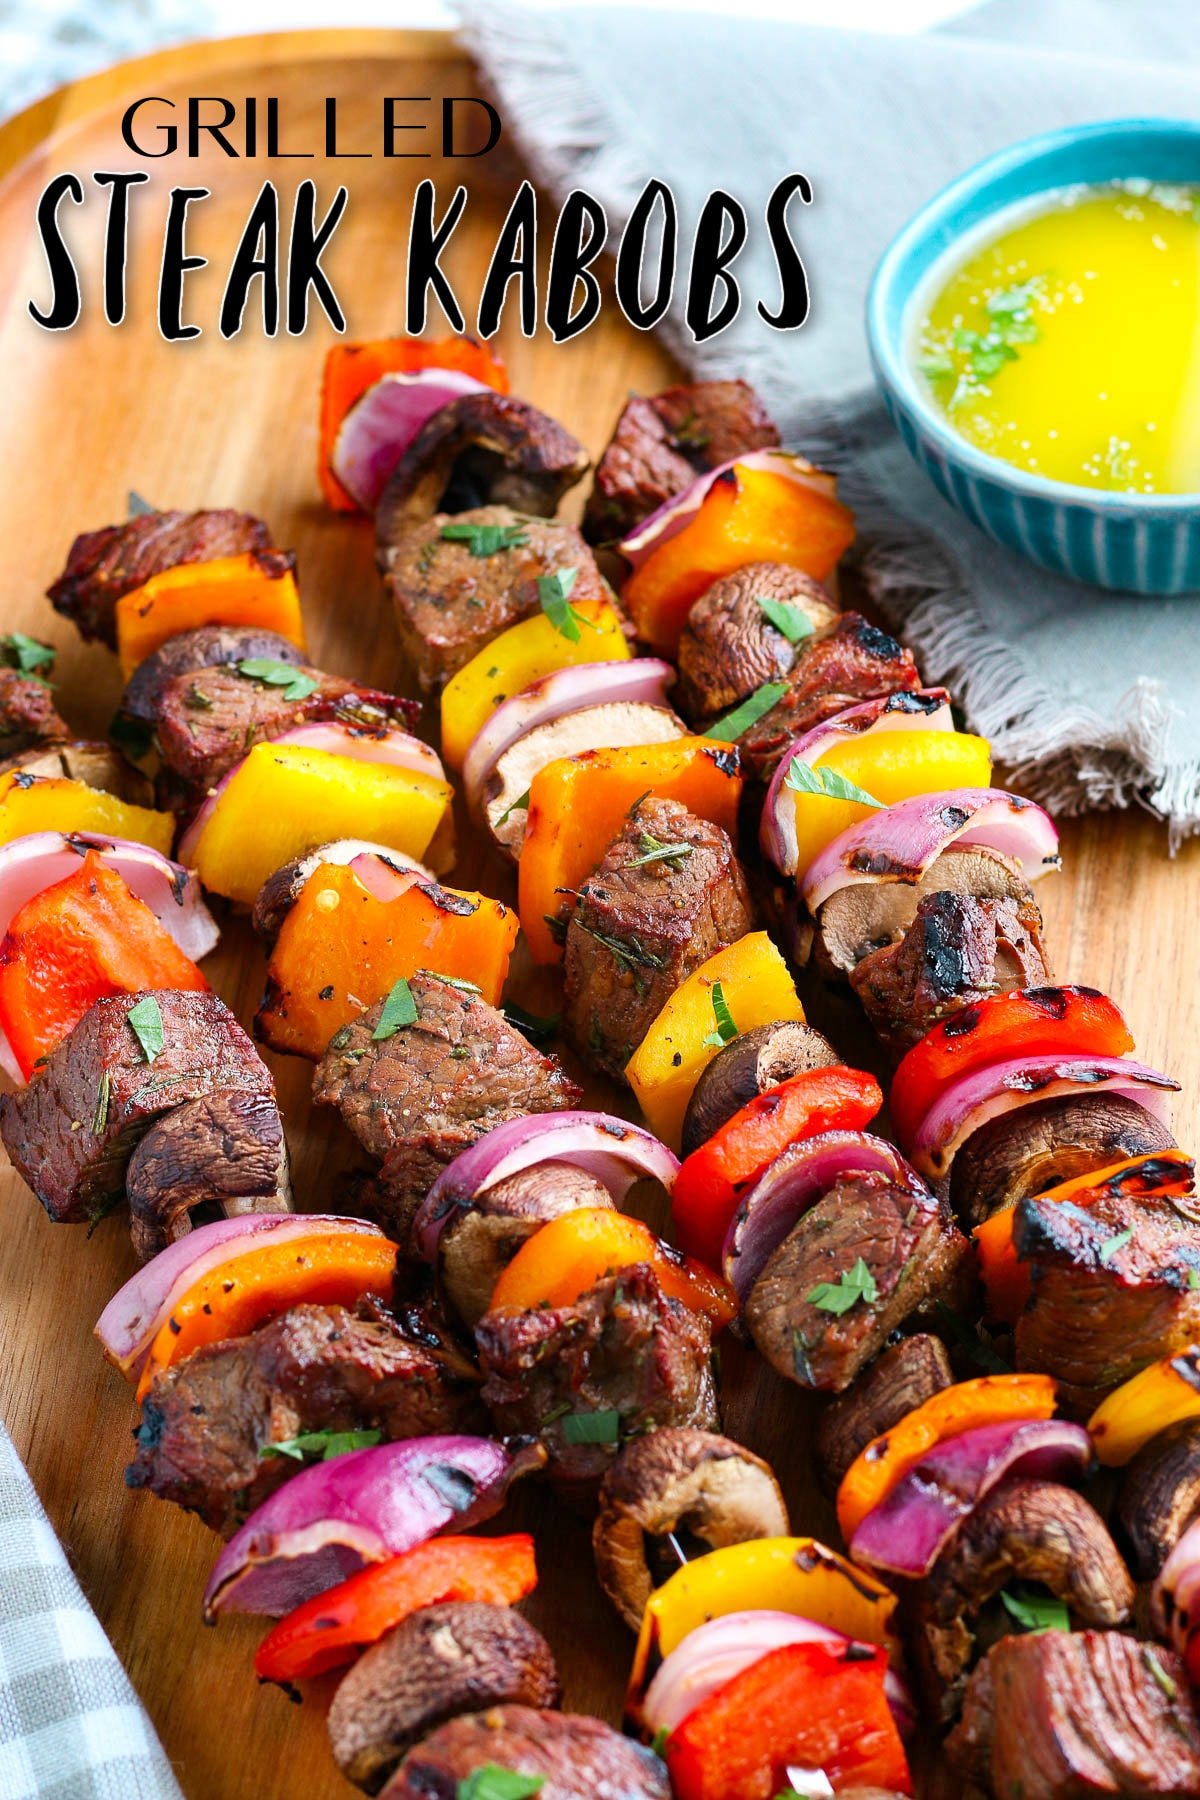 grilled steak kabobs ready to eat on wood plate with text overlay